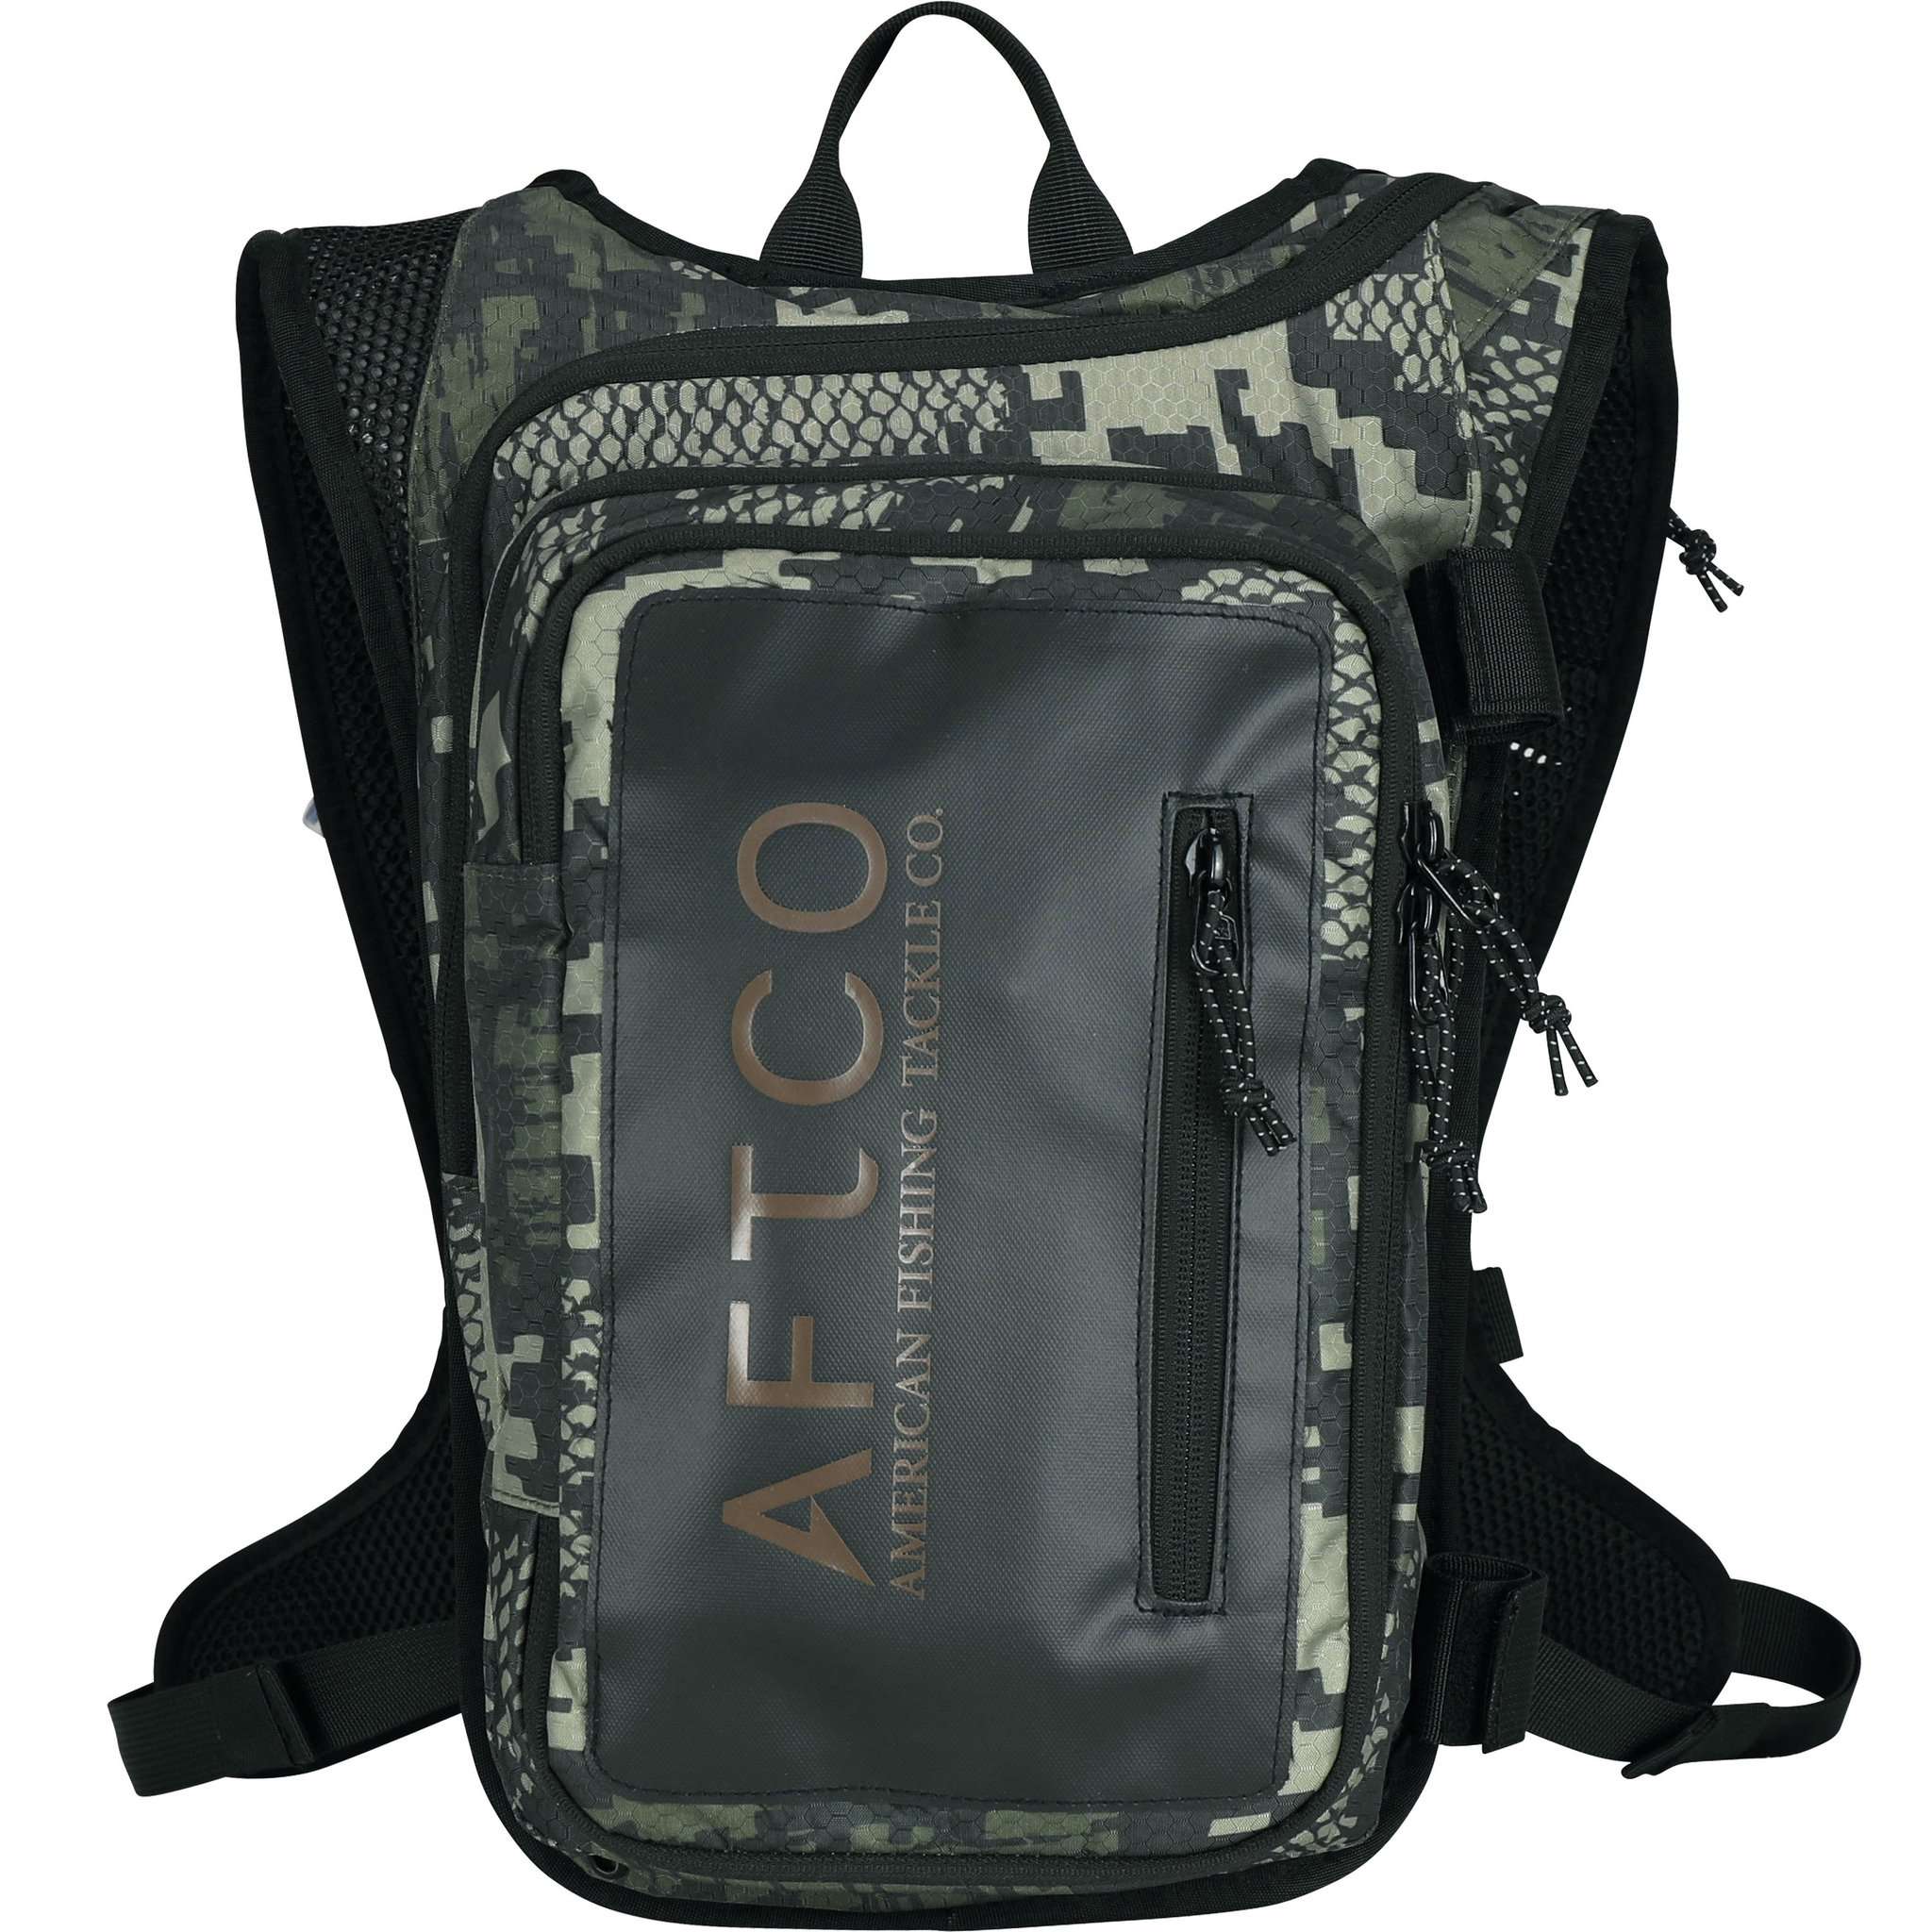 <p><strong>AFTCO Urban Angler Backpack</strong></p><p>An angling backpack for small waters that wonât fatigue but still has all the storage needed. The AFTCO Urban Angler Backpack can hold a 3600- and a 3500-size utility box, while still having room for a 1.5-liter hydration bladder. Numerous storage options allow the pack to be customized for the trip. Lumbar support and elevated back rest keep this small backpack comfortable enough to wear all day. $99. <a href=